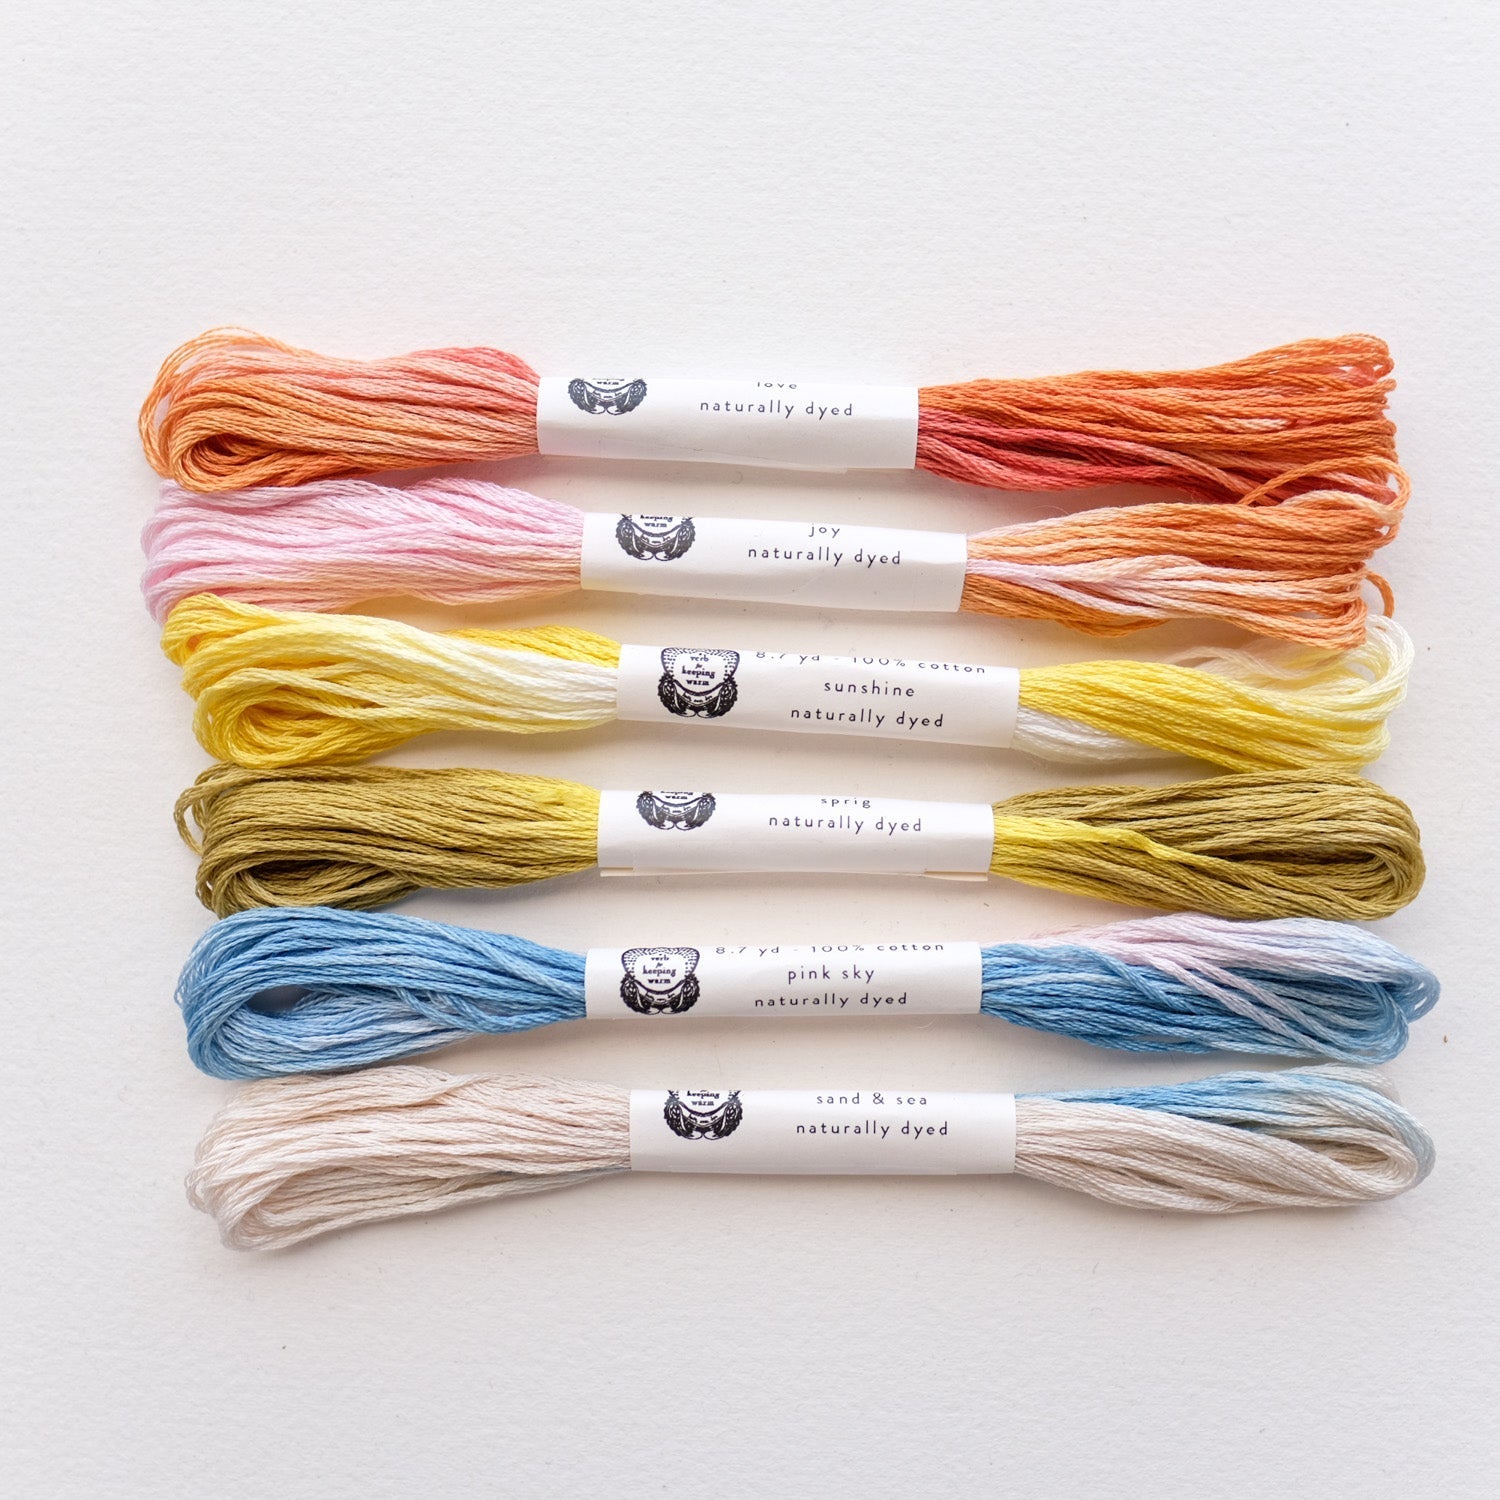 if there was such a thing as a phd in embroidery floss winding, i'd have  one - Pretty …